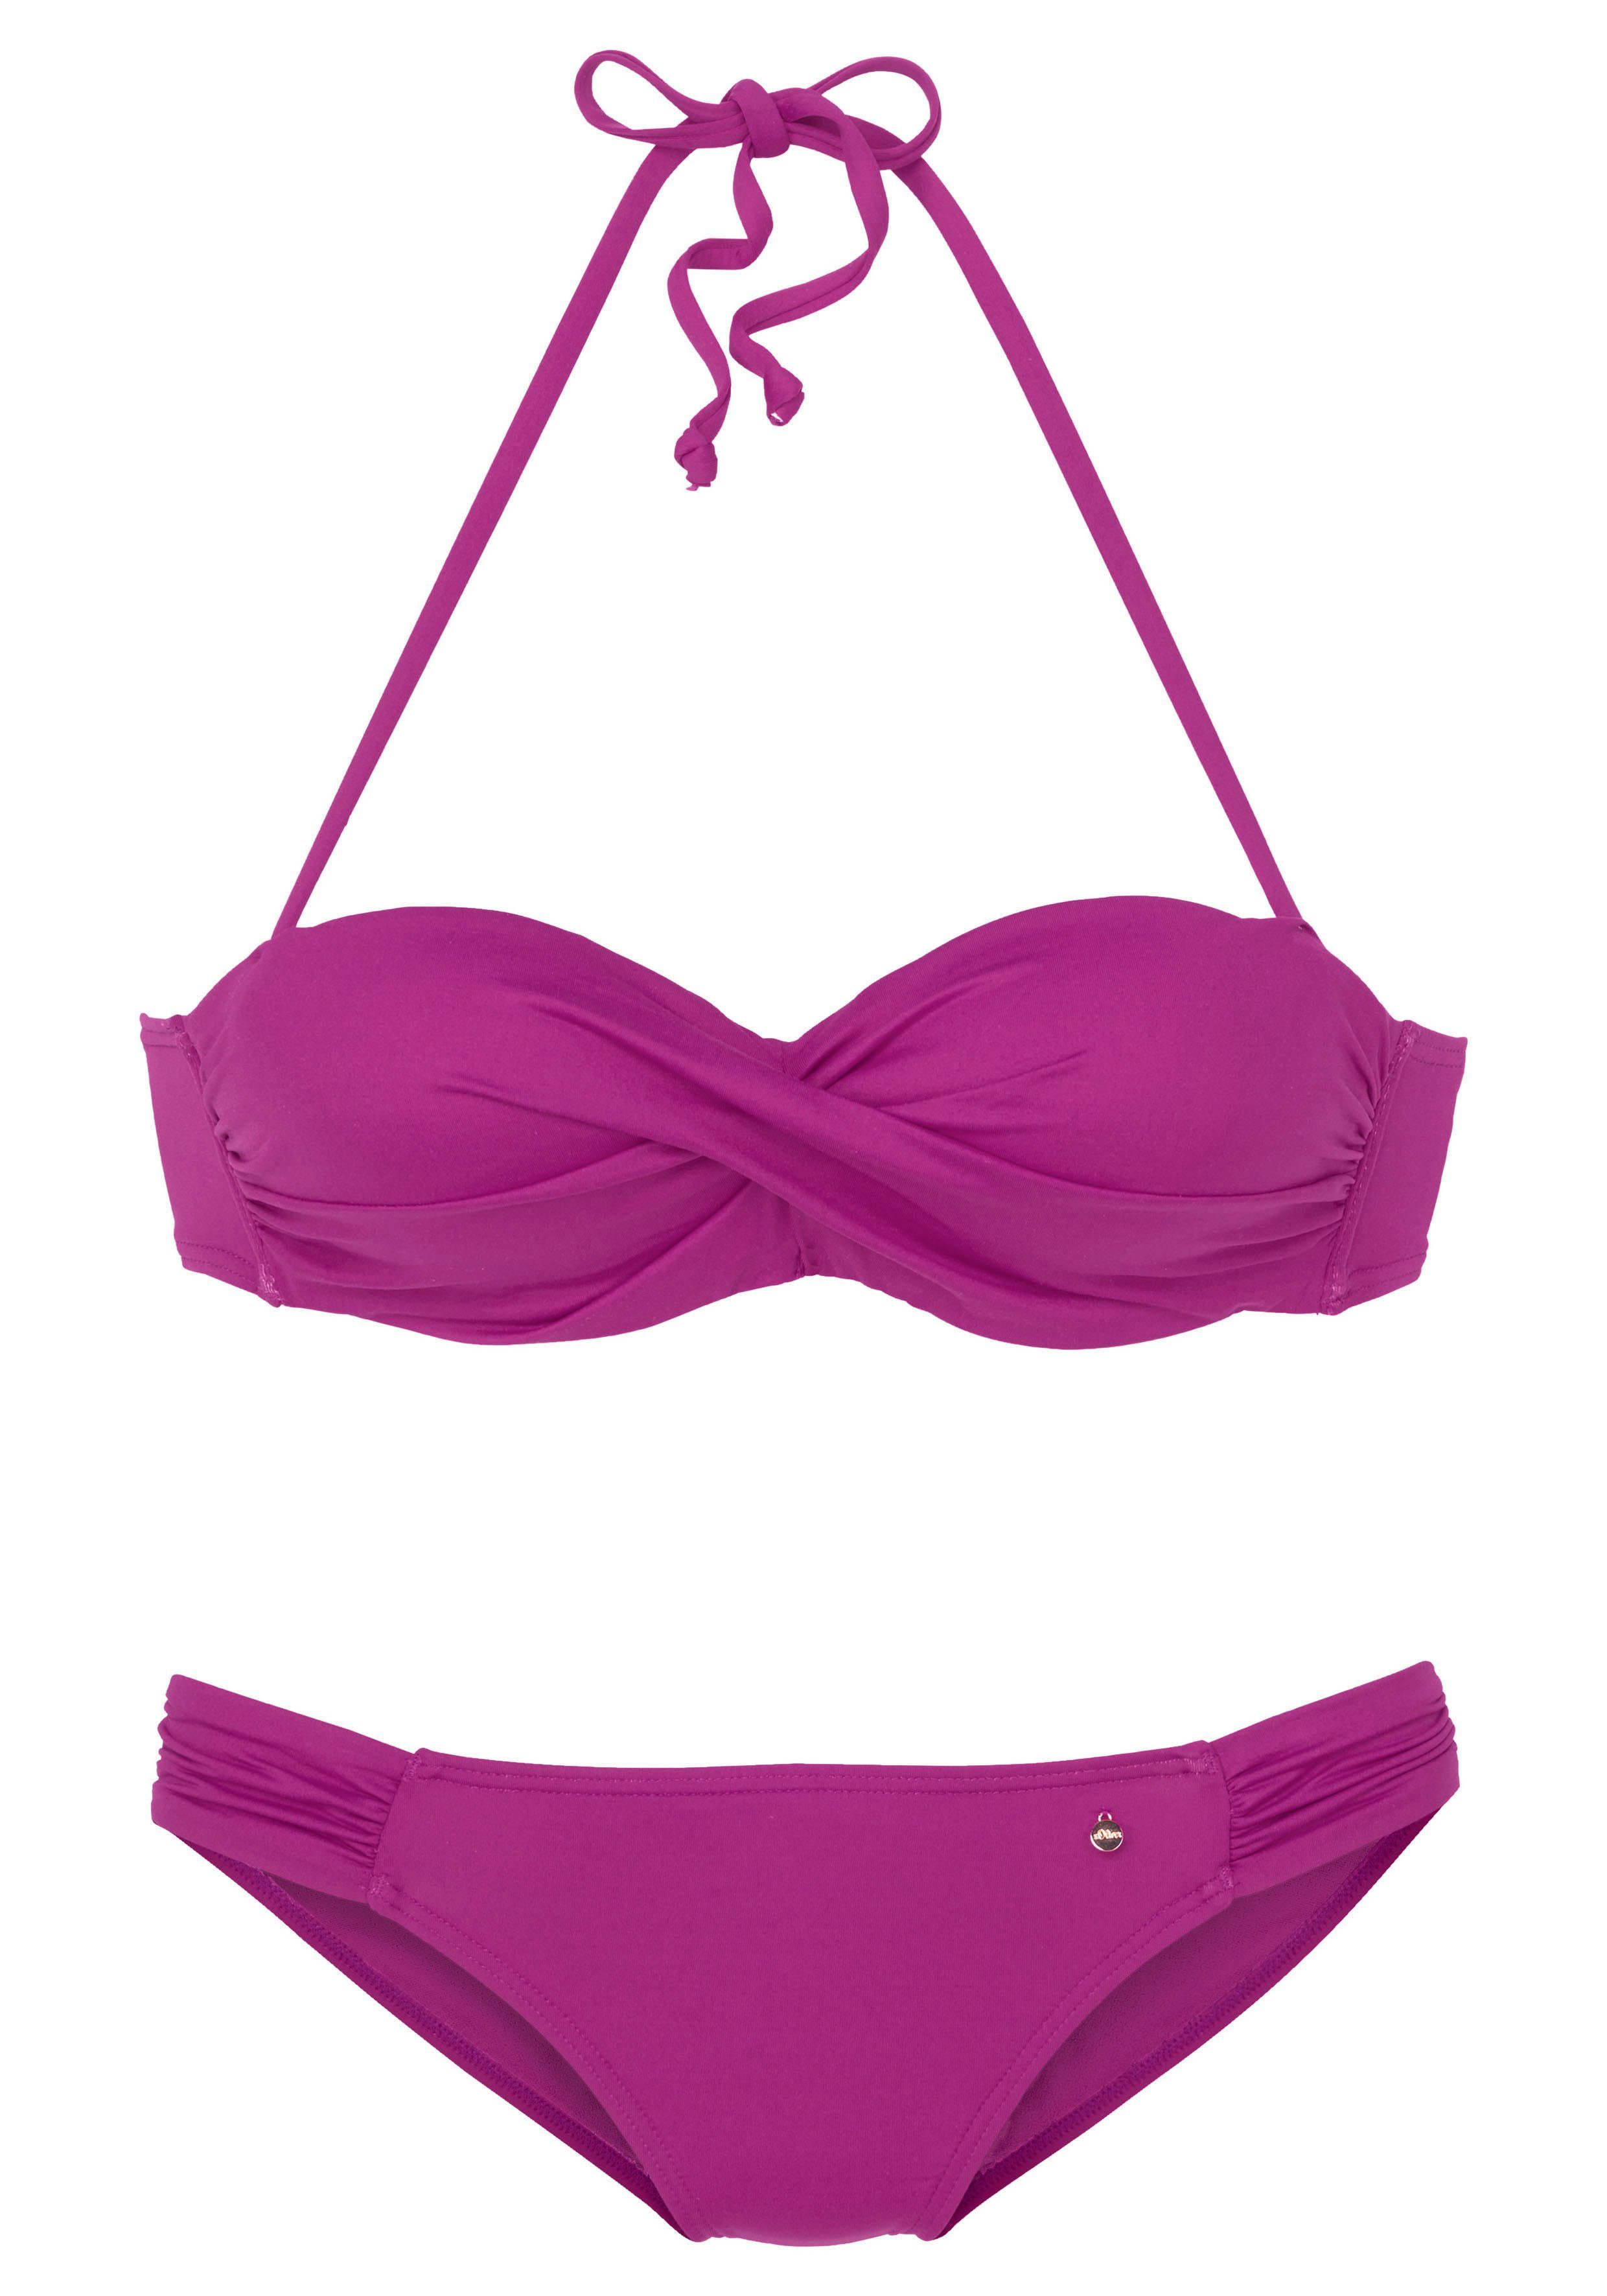 s.oliver red label beachwear beugelbikini in bandeaumodel met ruches roze